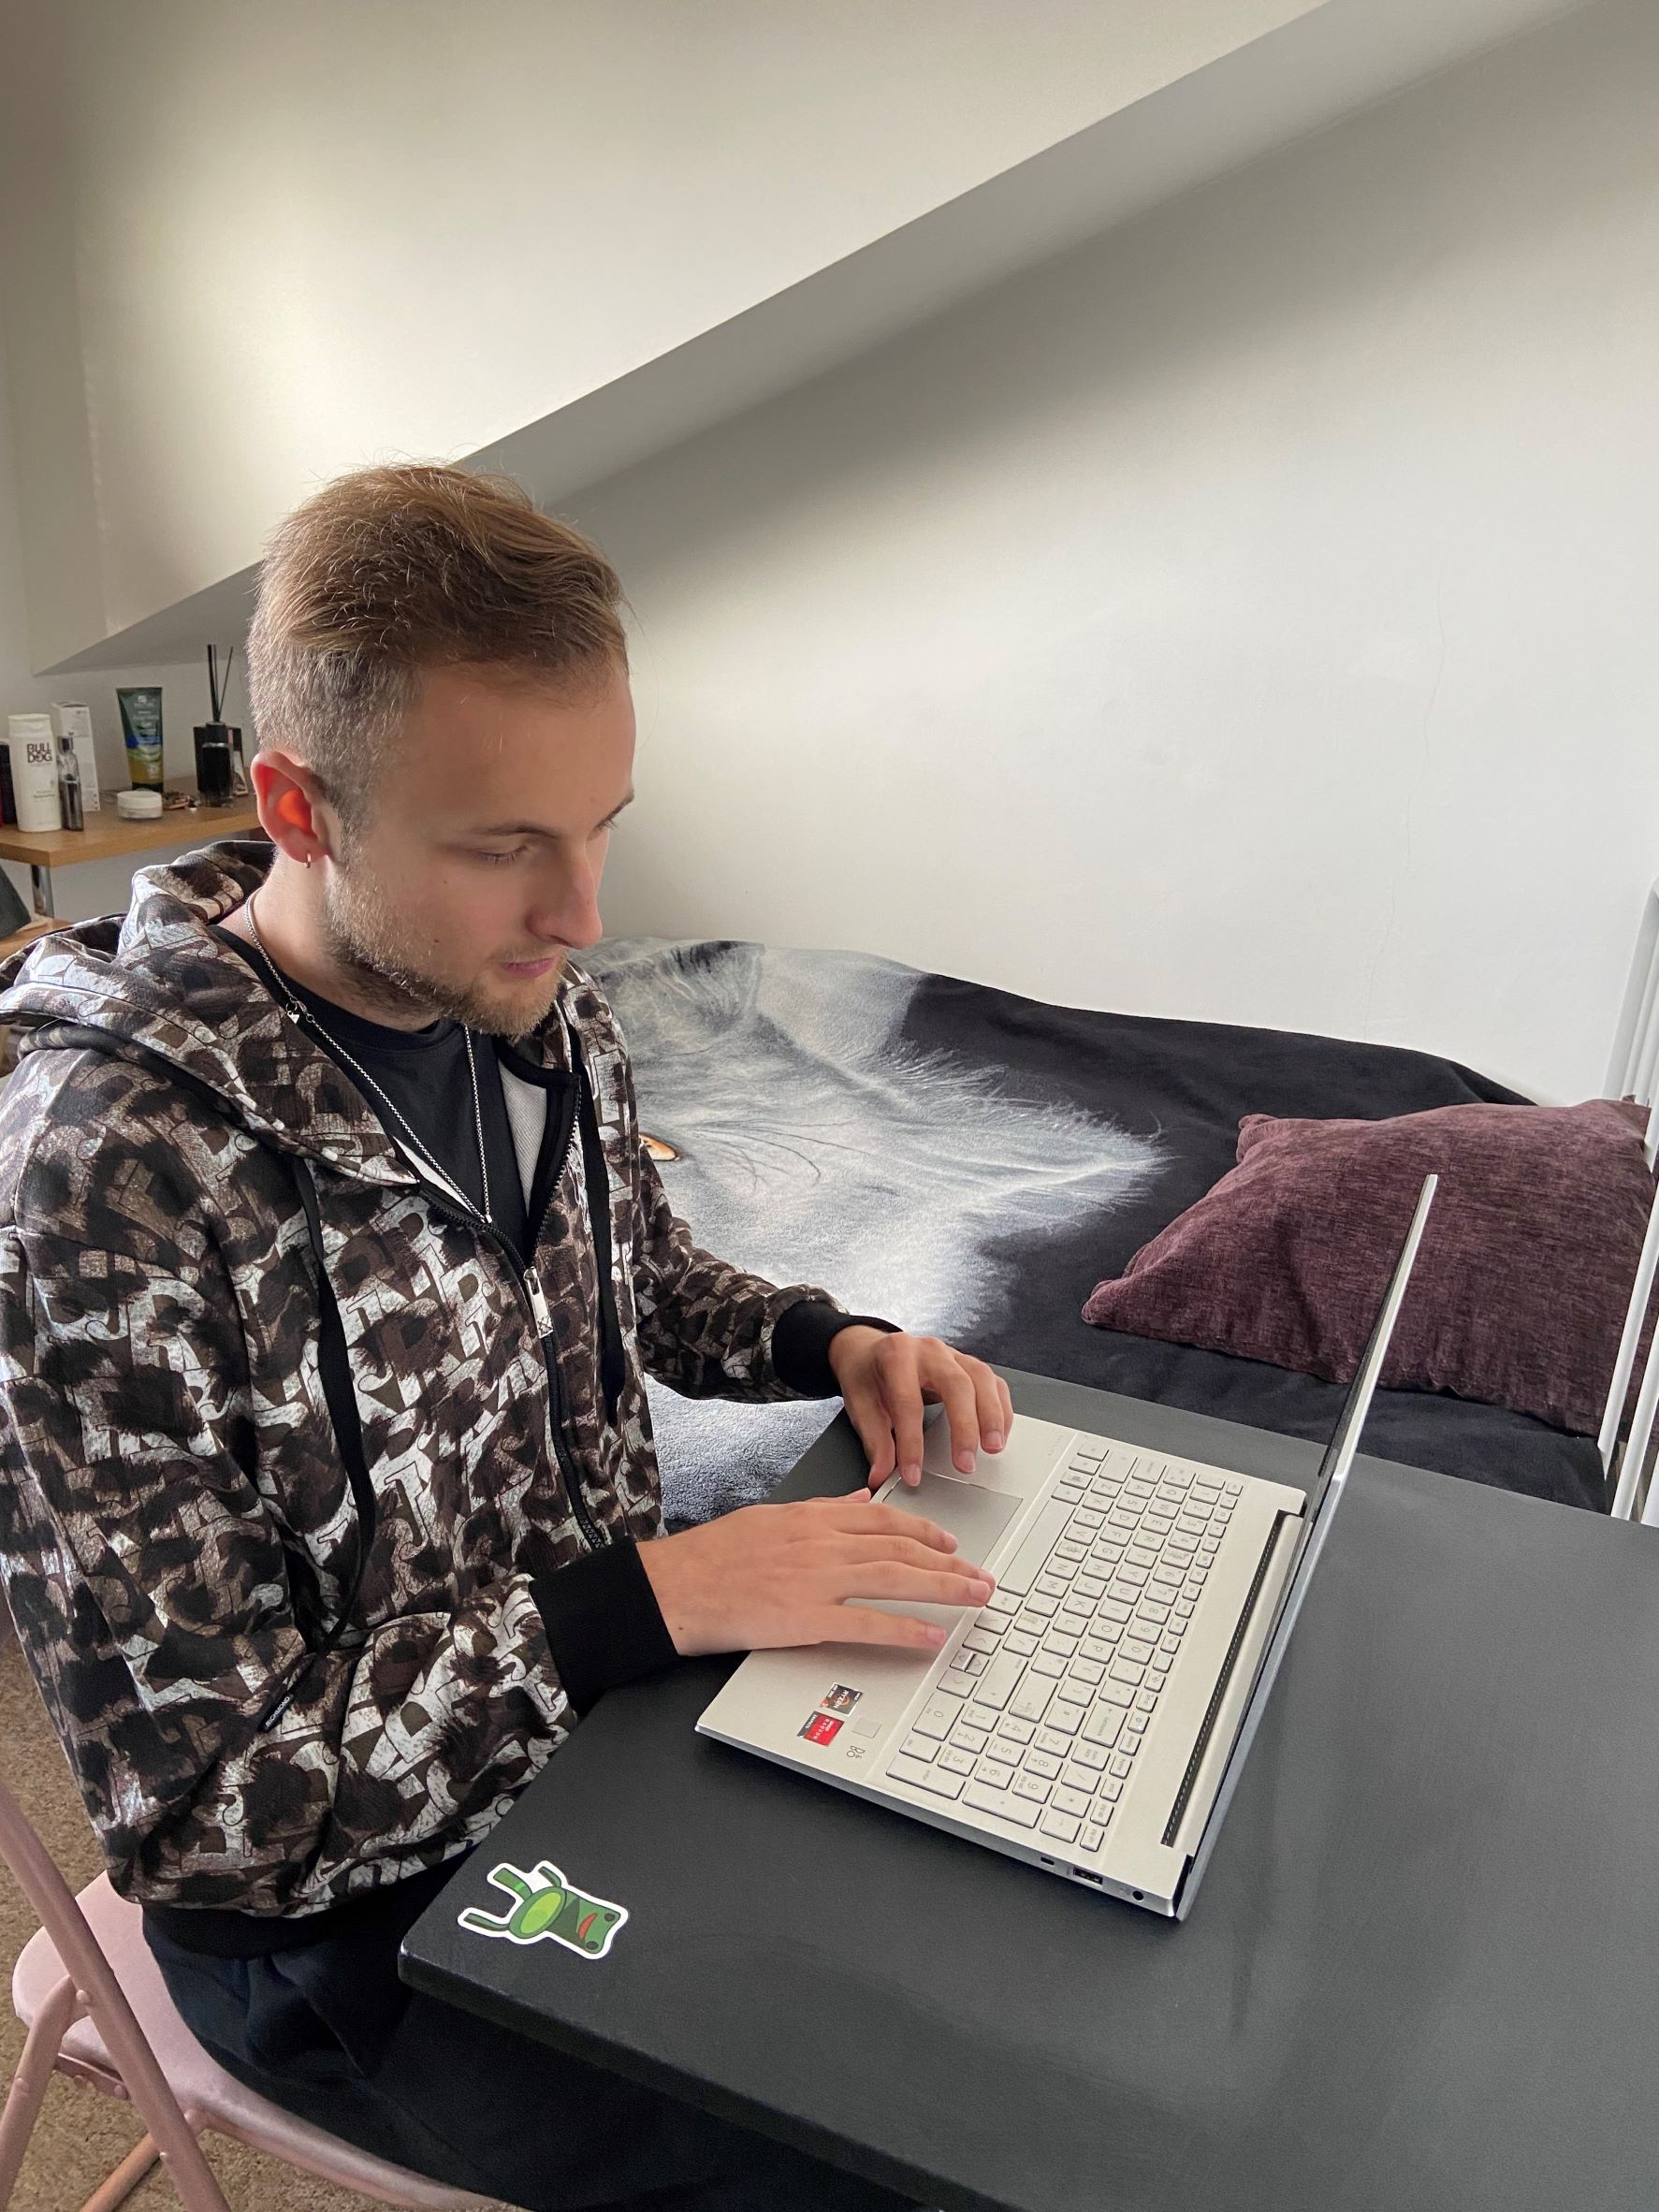 A picture showing Aleksandr studying in front of his laptop, sat on a desk in his bedroom.